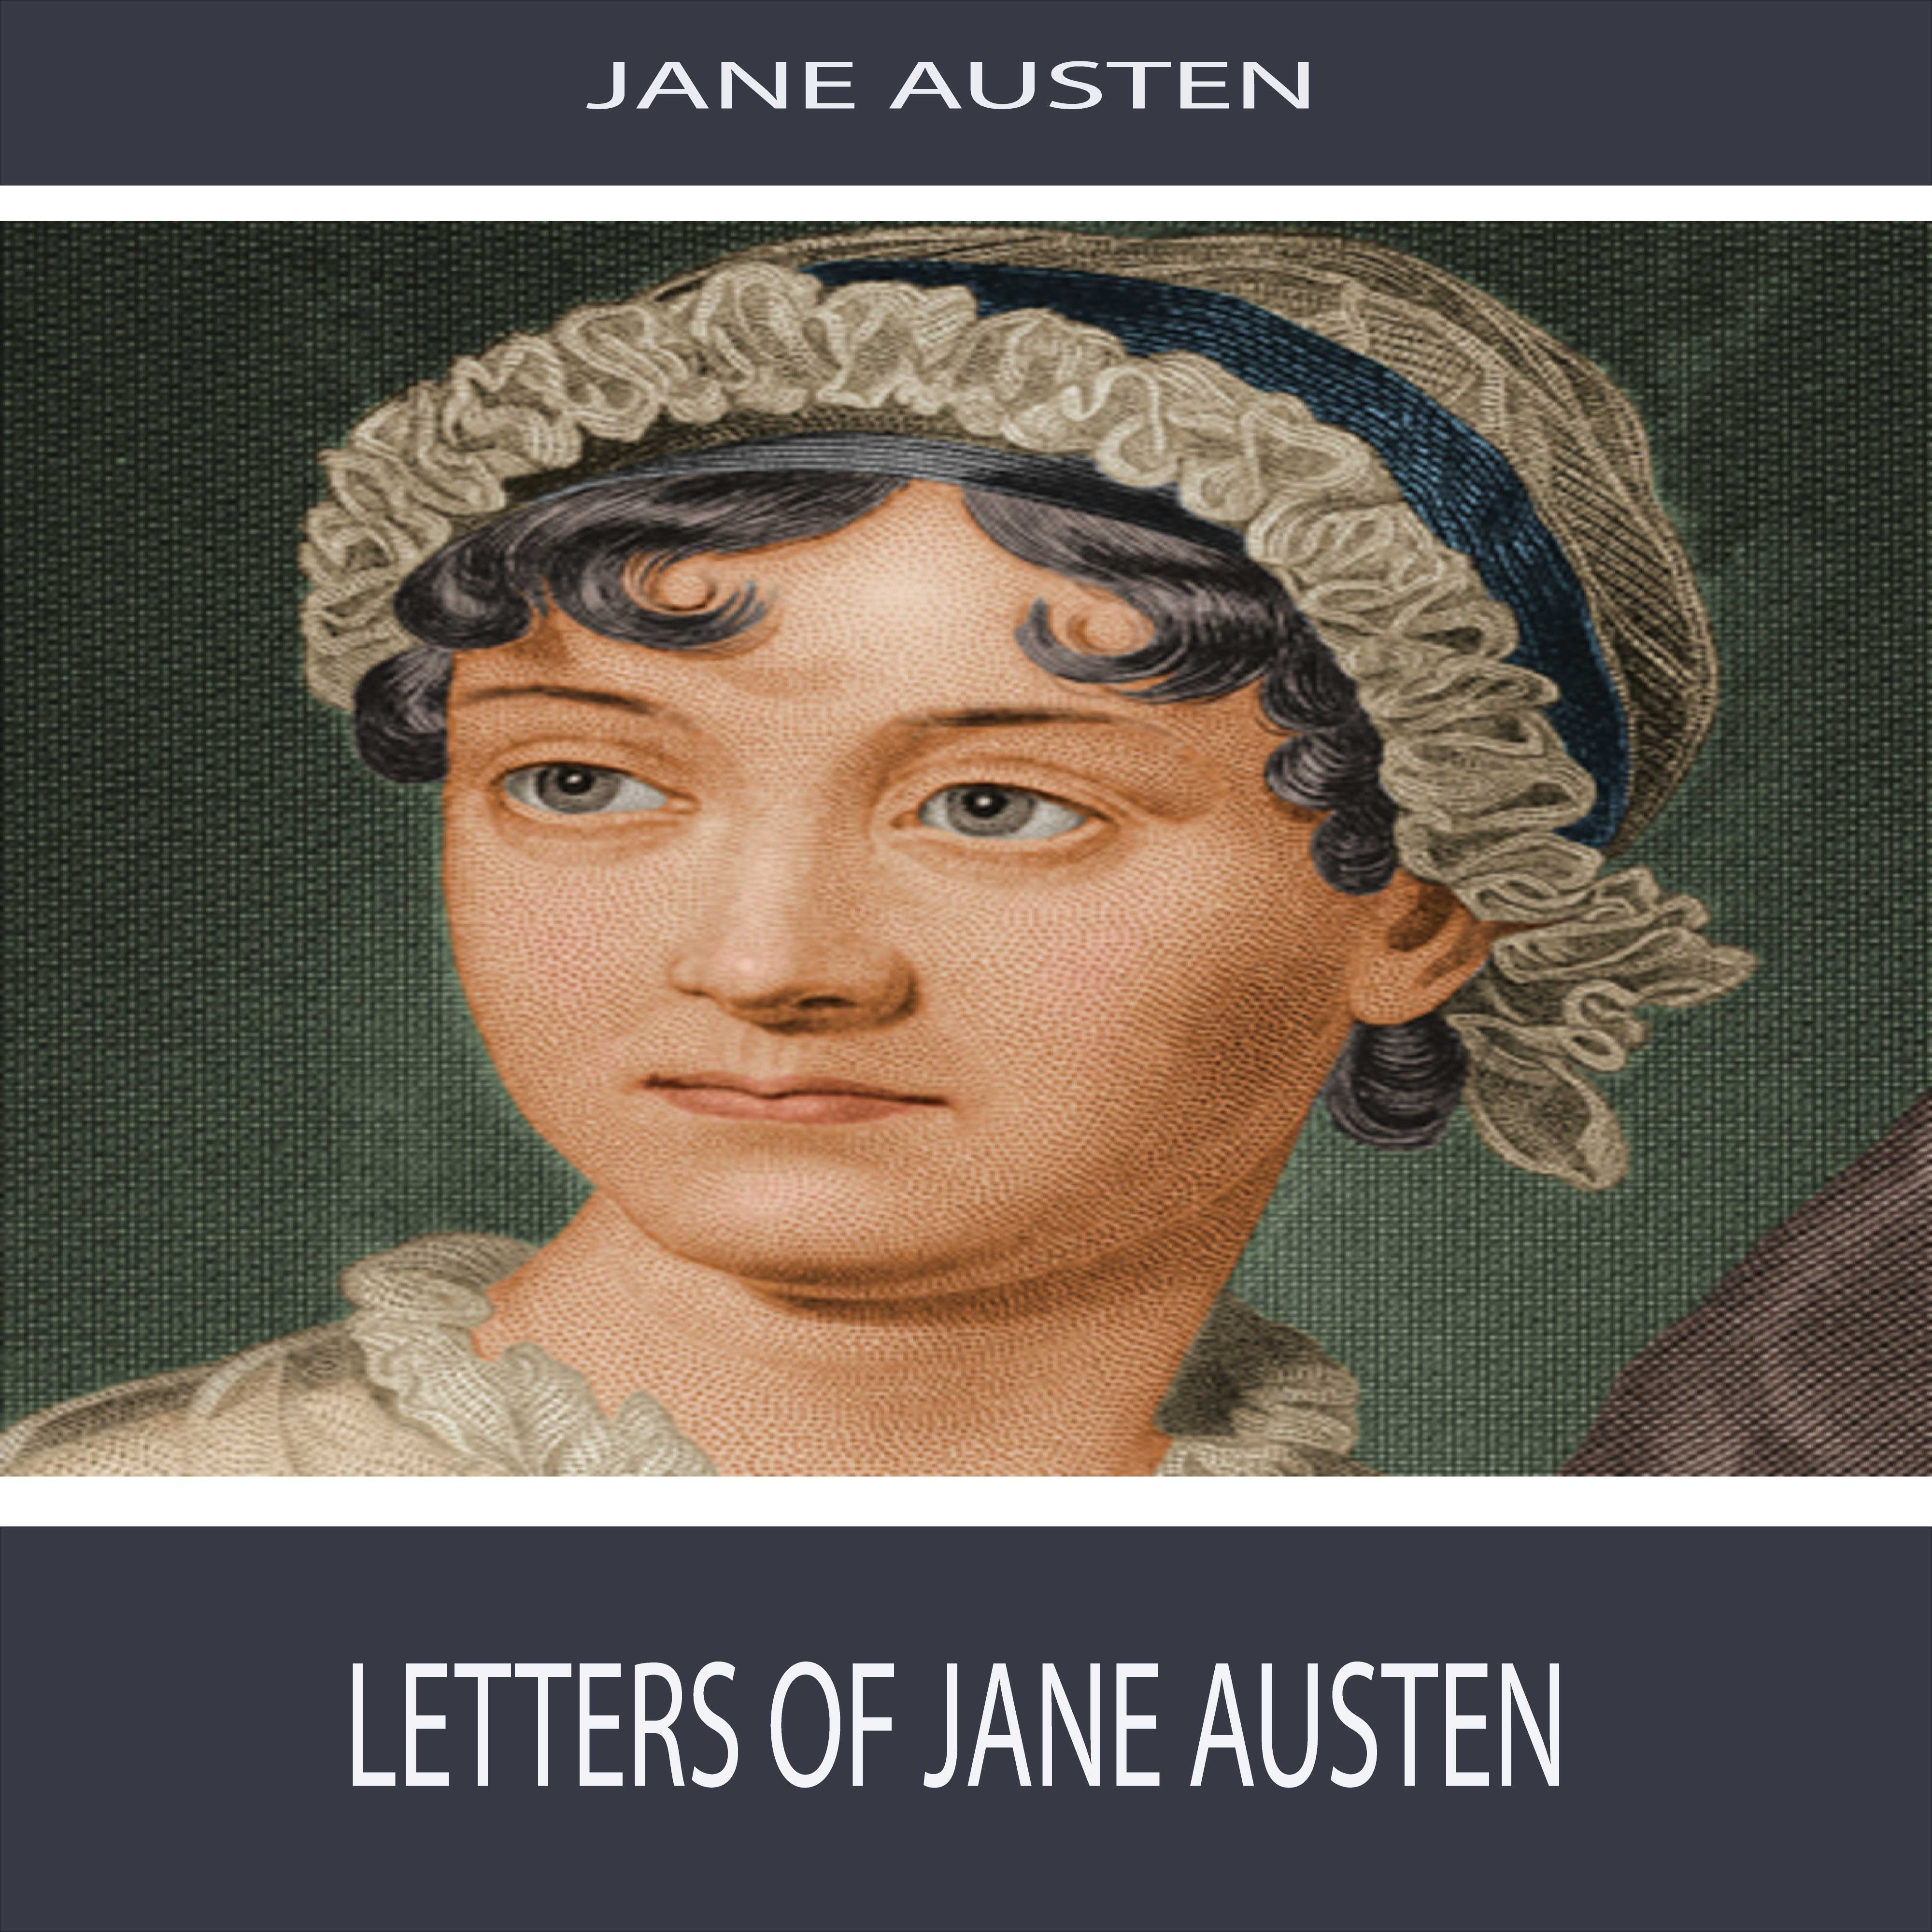 Letters of Jane Austen: Section 26